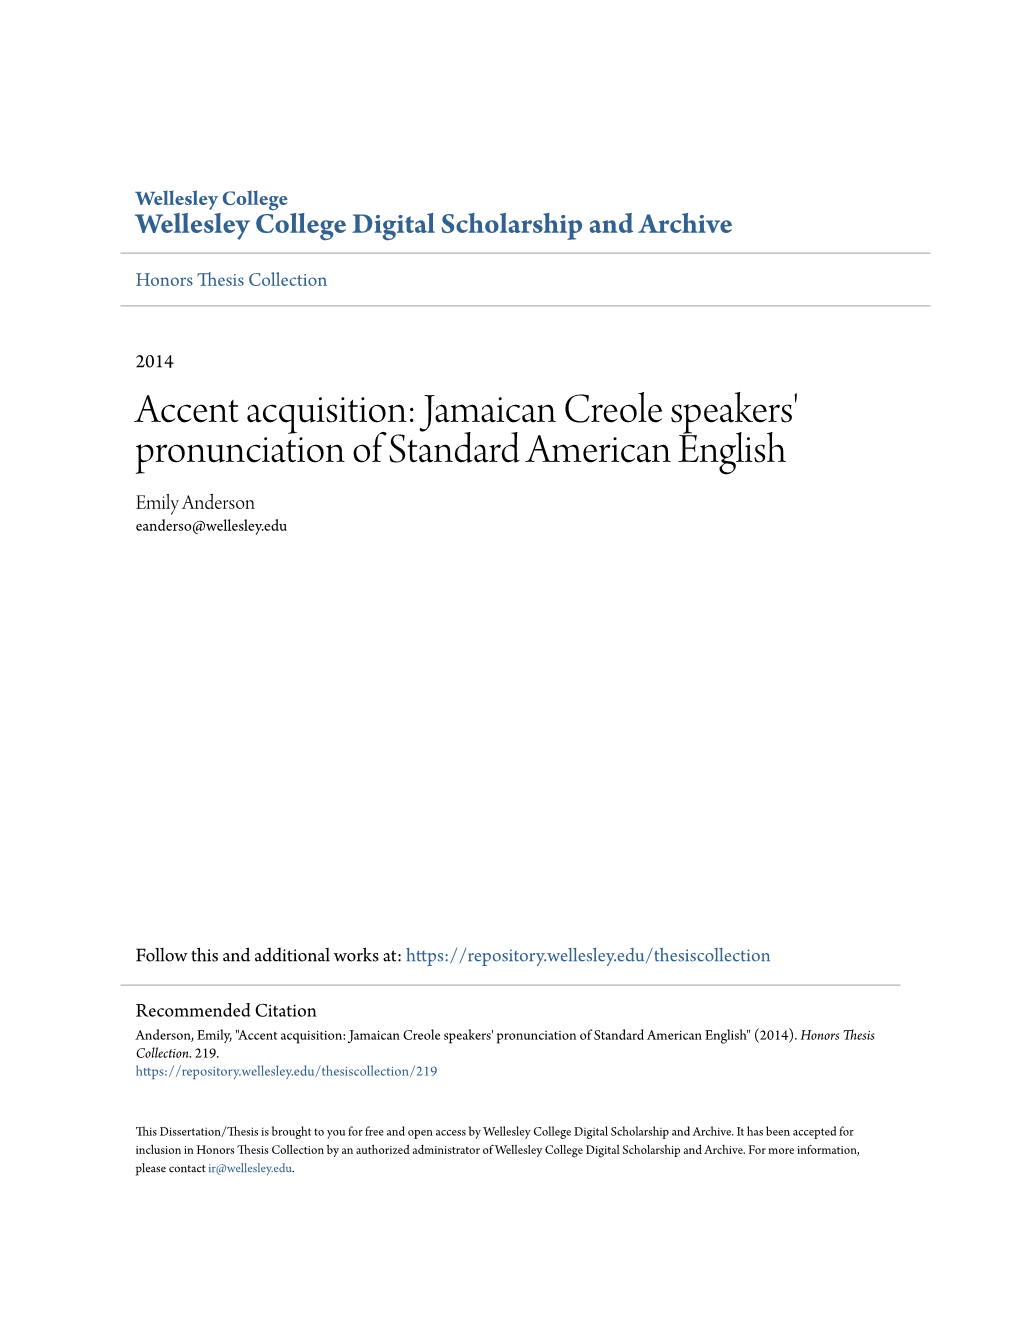 Accent Acquisition: Jamaican Creole Speakers' Pronunciation of Standard American English Emily Anderson Eanderso@Wellesley.Edu